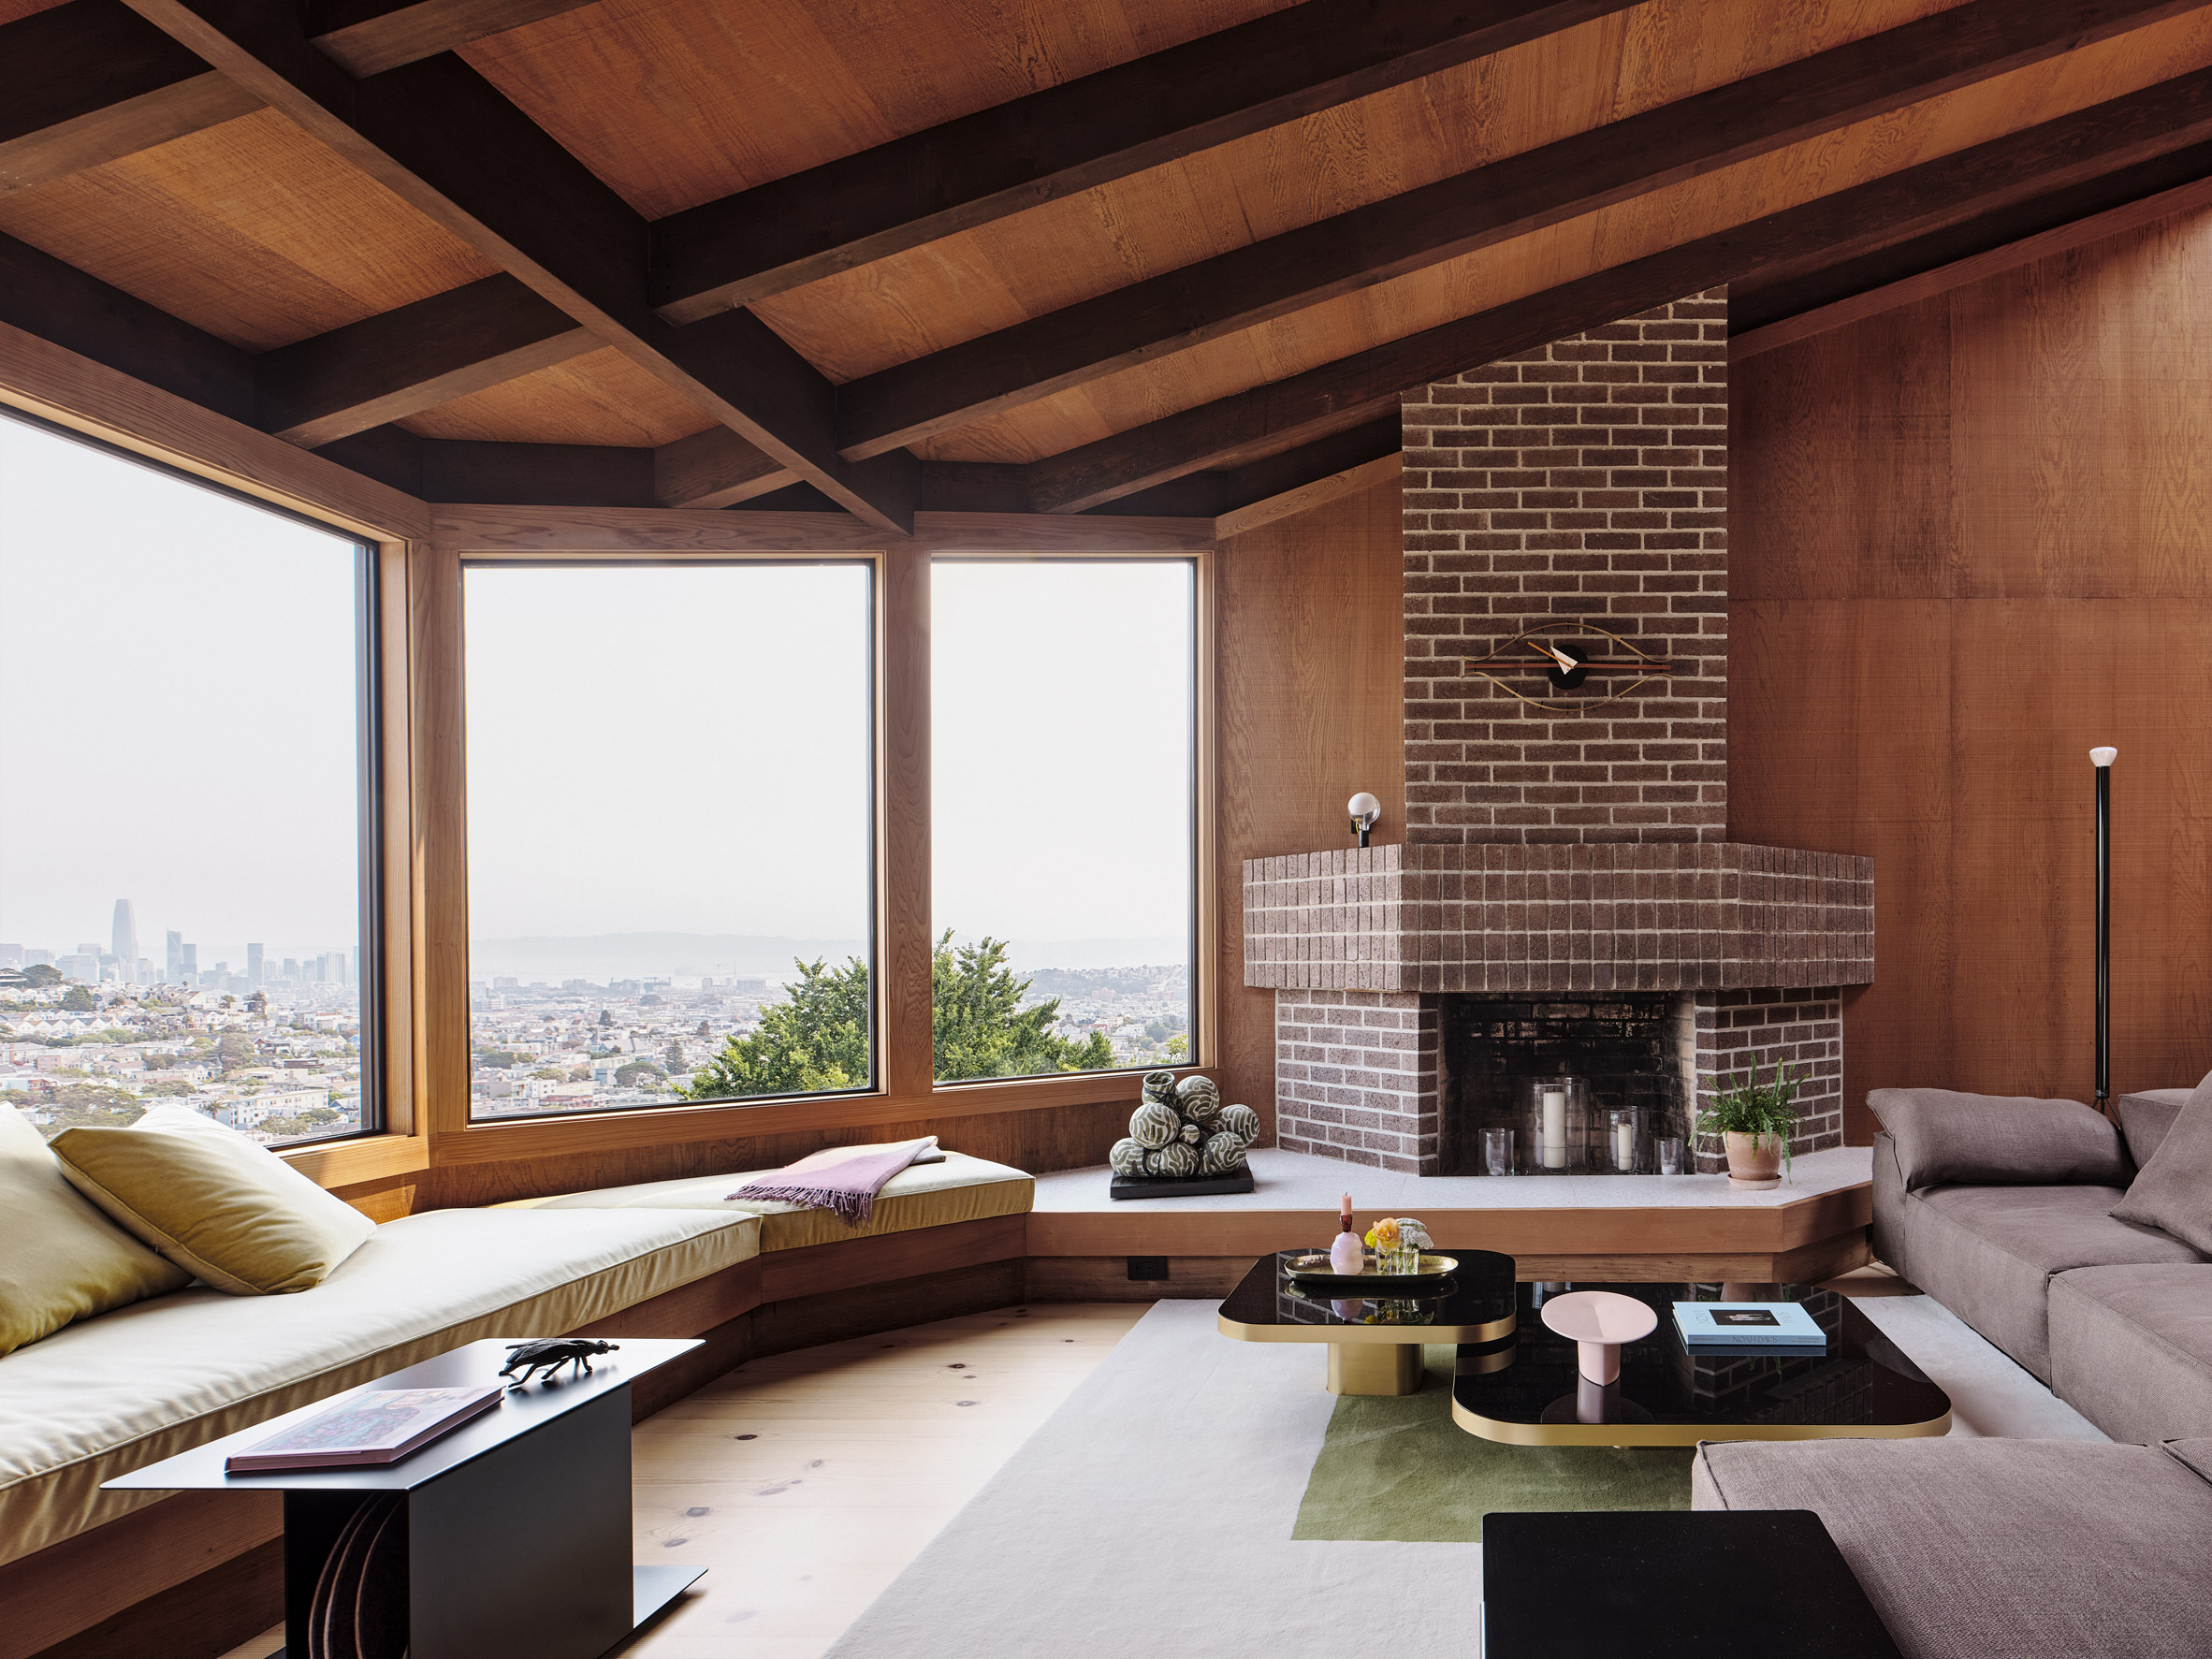 Brick fireplace with views of San Francisco and wrap-around seating